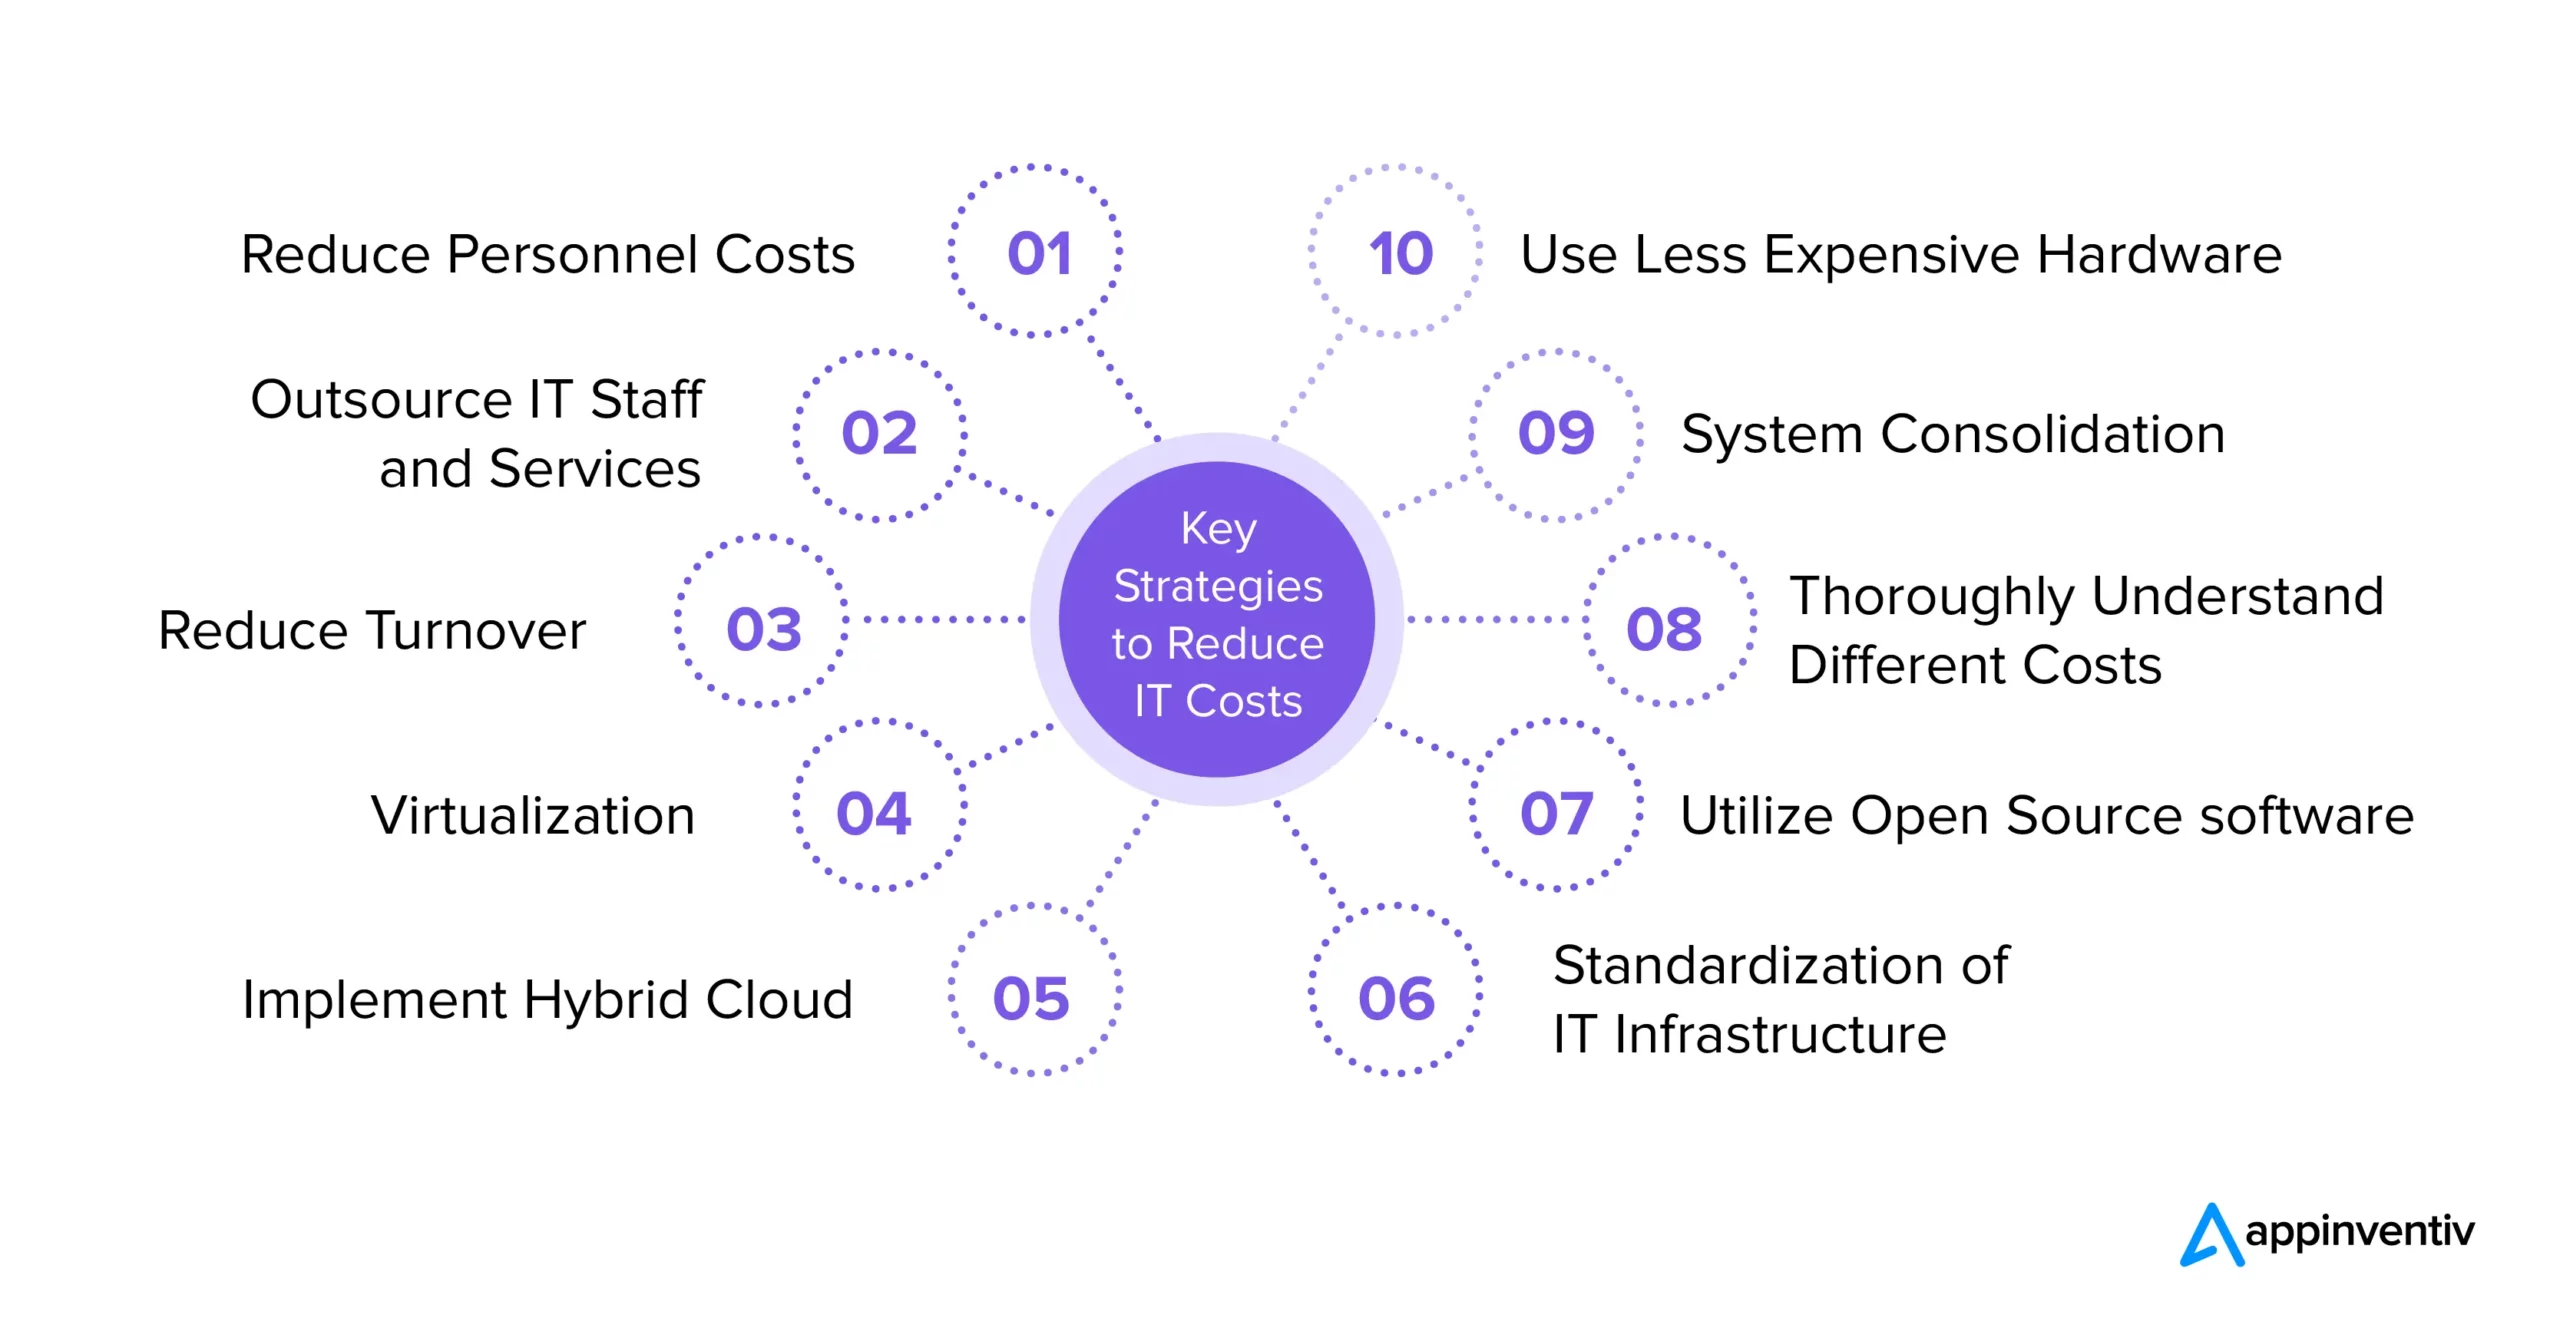 Strategies to Reduce IT Costs